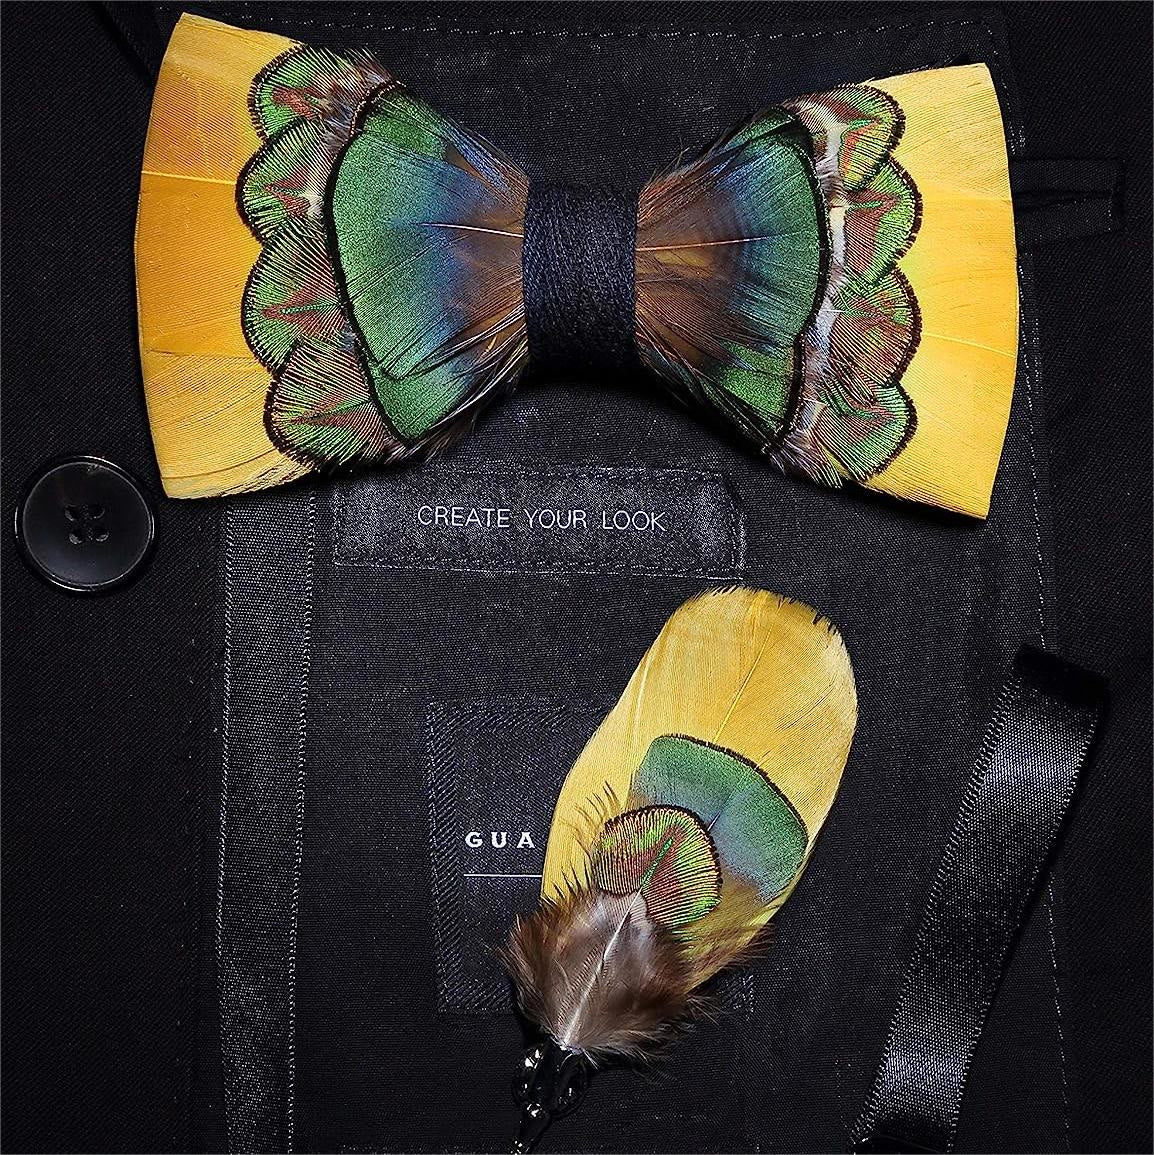 Bright Yellow & Green Peacock Feather Bow Tie with Lapel Pin